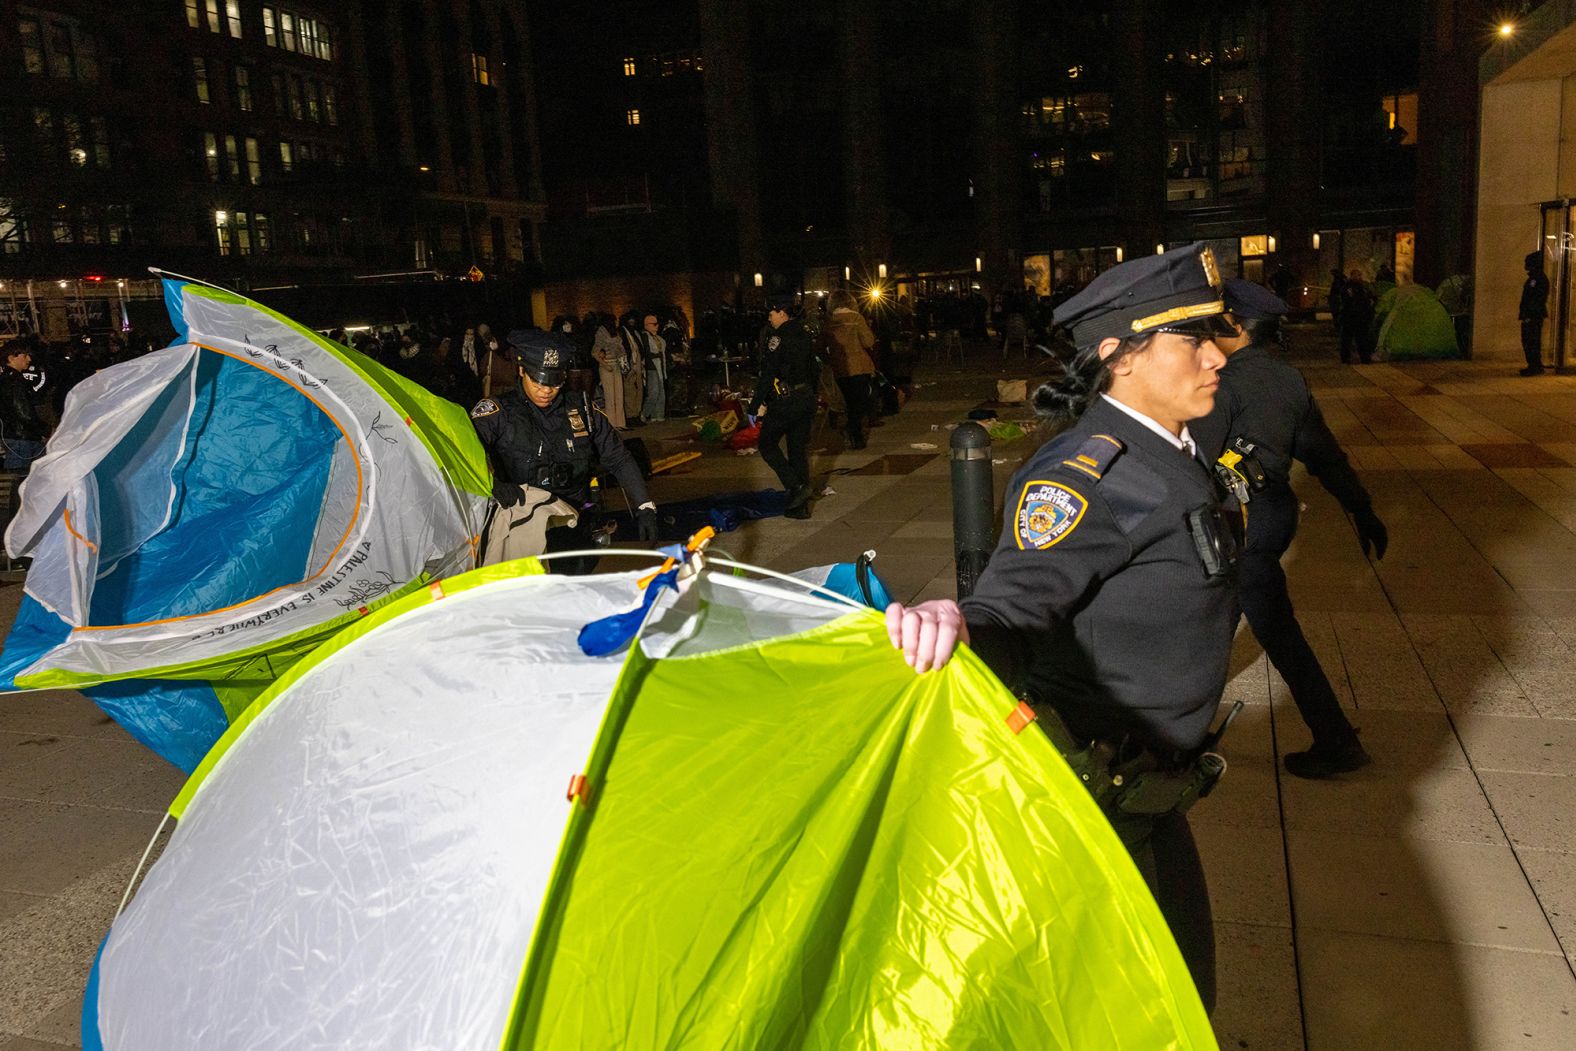 Police officers clear away tents from an encampment at New York University on April 22.